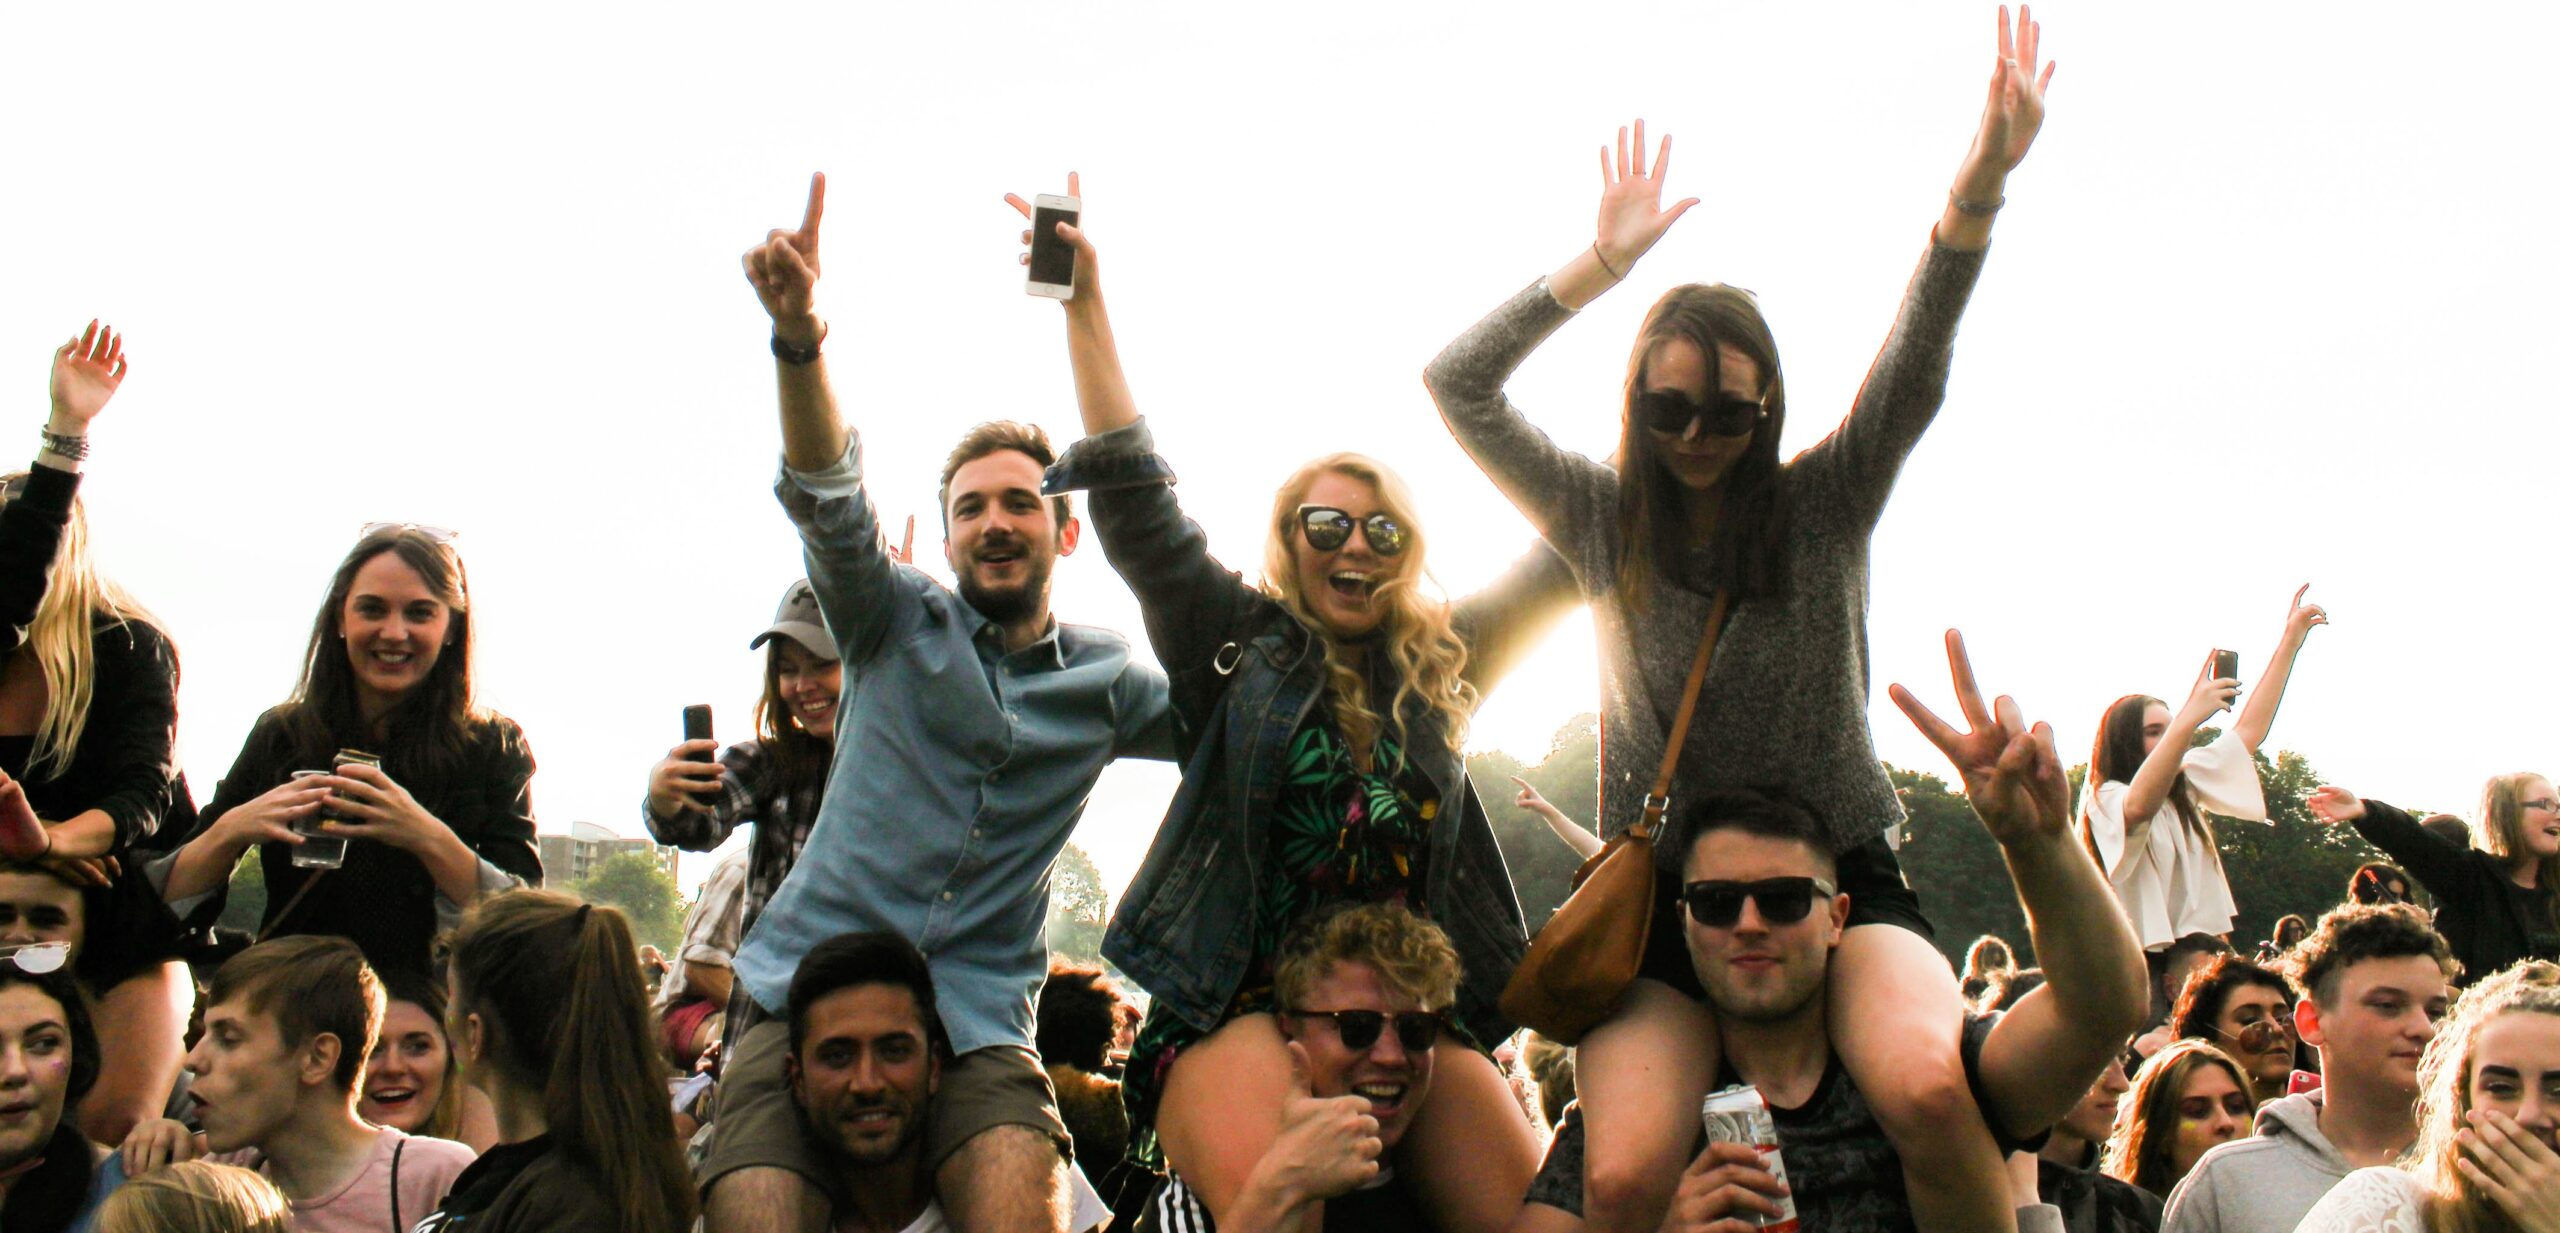 The Impact of Music Festivals on Student Culture